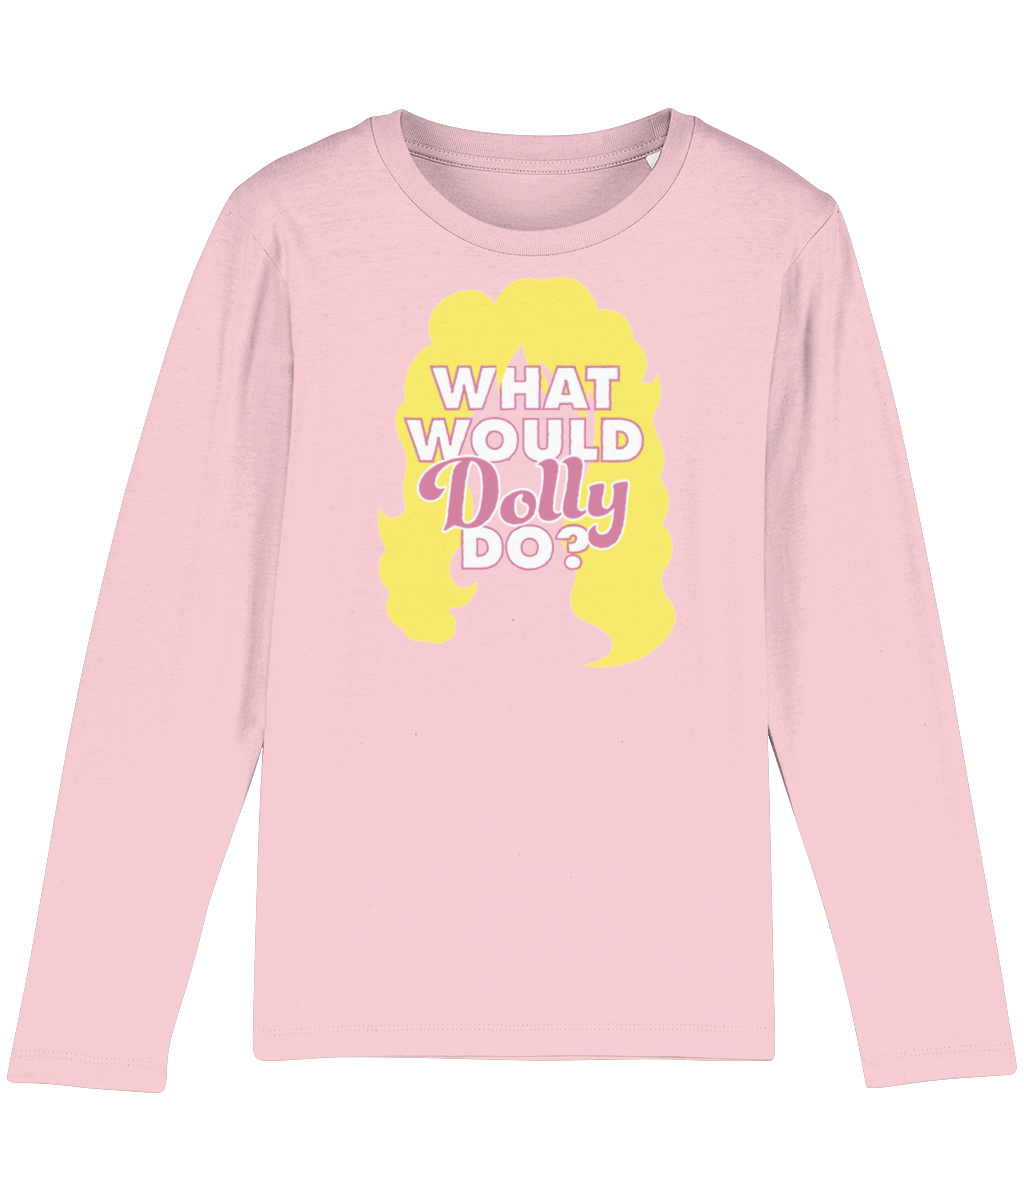 Long Sleeve T Shirt, 100% Organic Soft Cotton, What Would Dolly do?